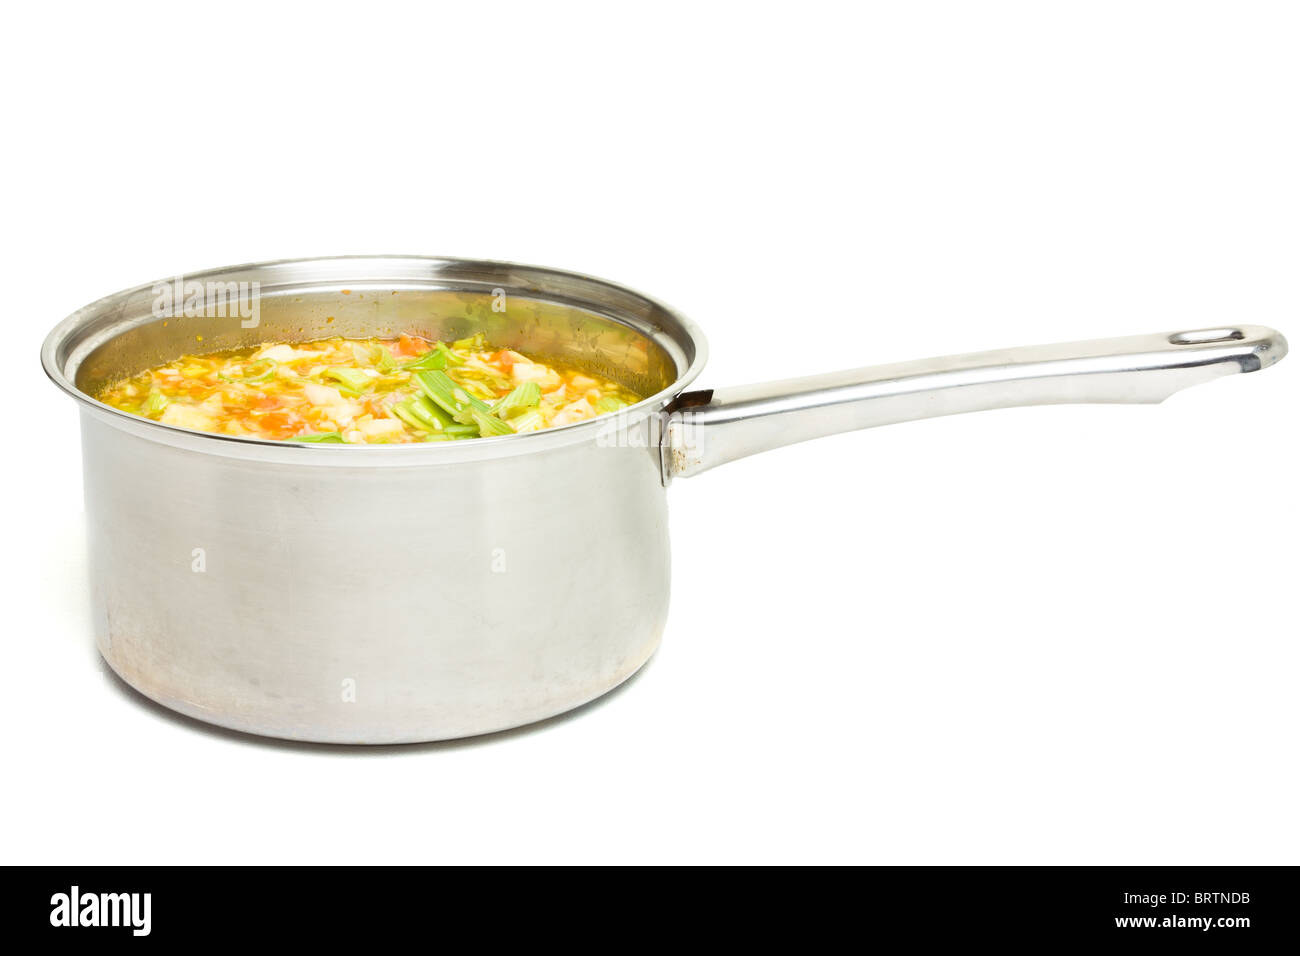 Rustic vegetable and ham broth in stainless steel saucepan isolated on white. Stock Photo